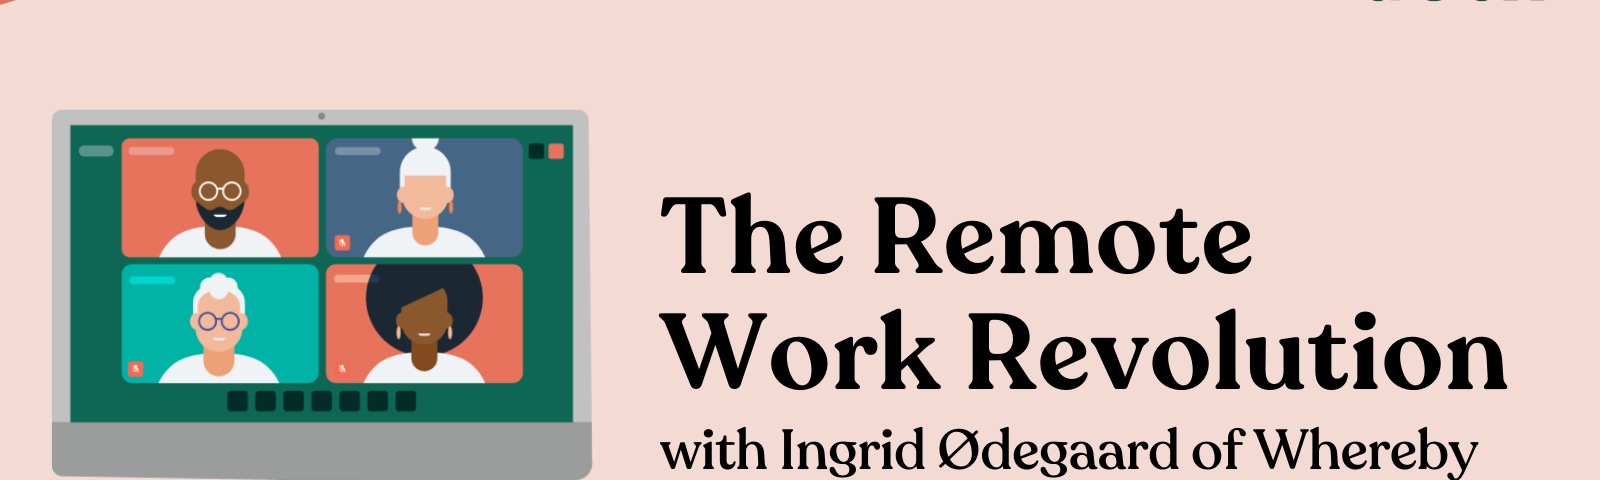 A computer with a Whereby call of four participants next to “The Remote Work Revolution with Ingrid Odegaard of Whereby”